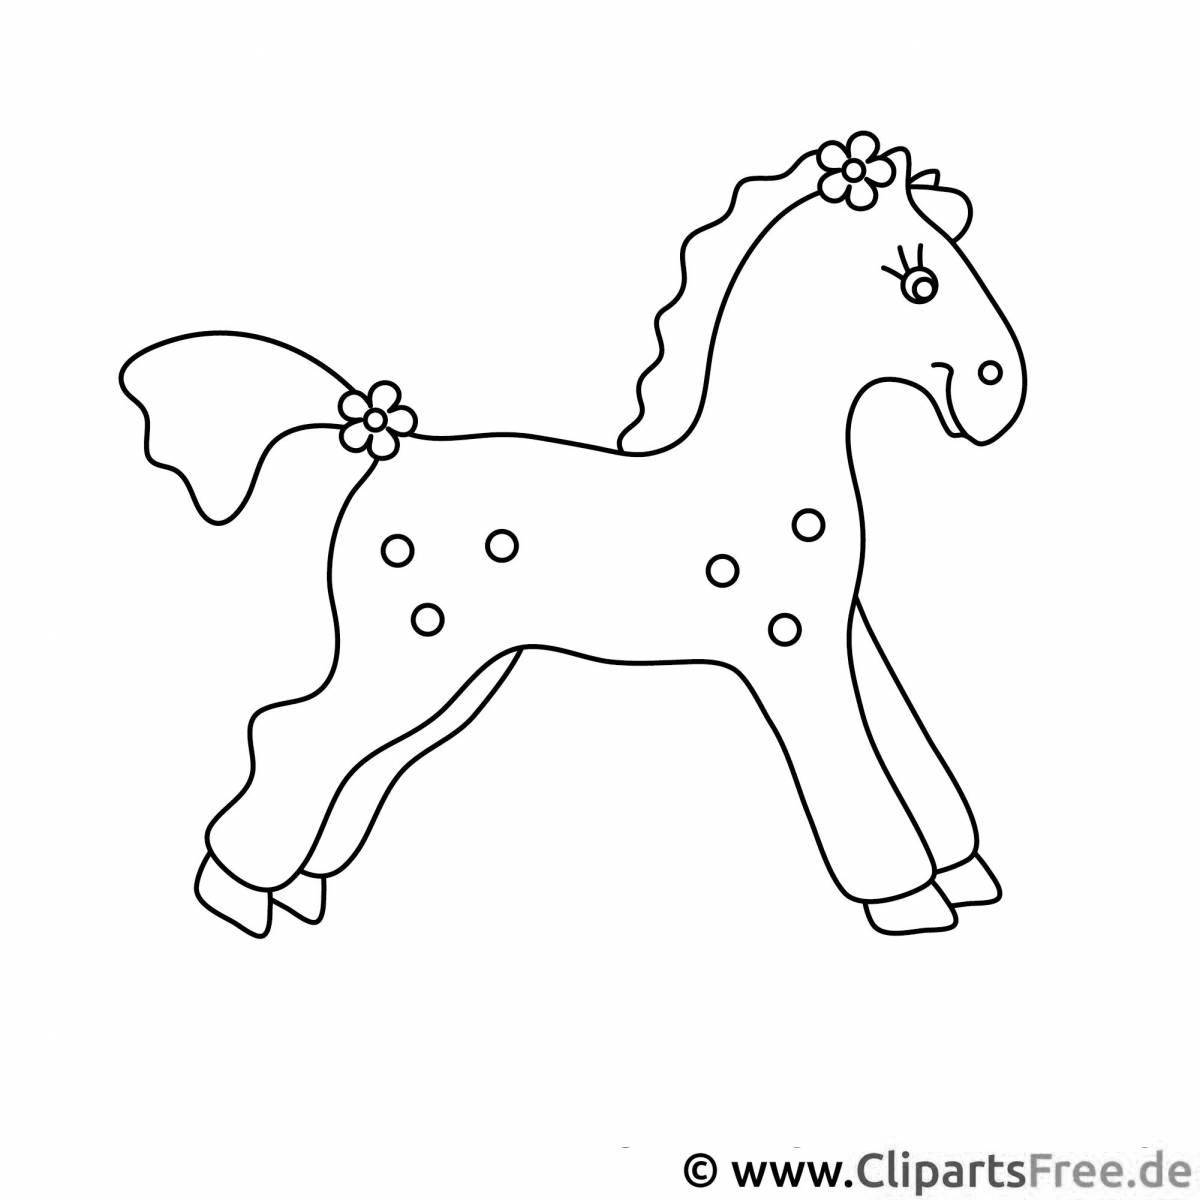 Amazing Dymkovo horse coloring book for kids